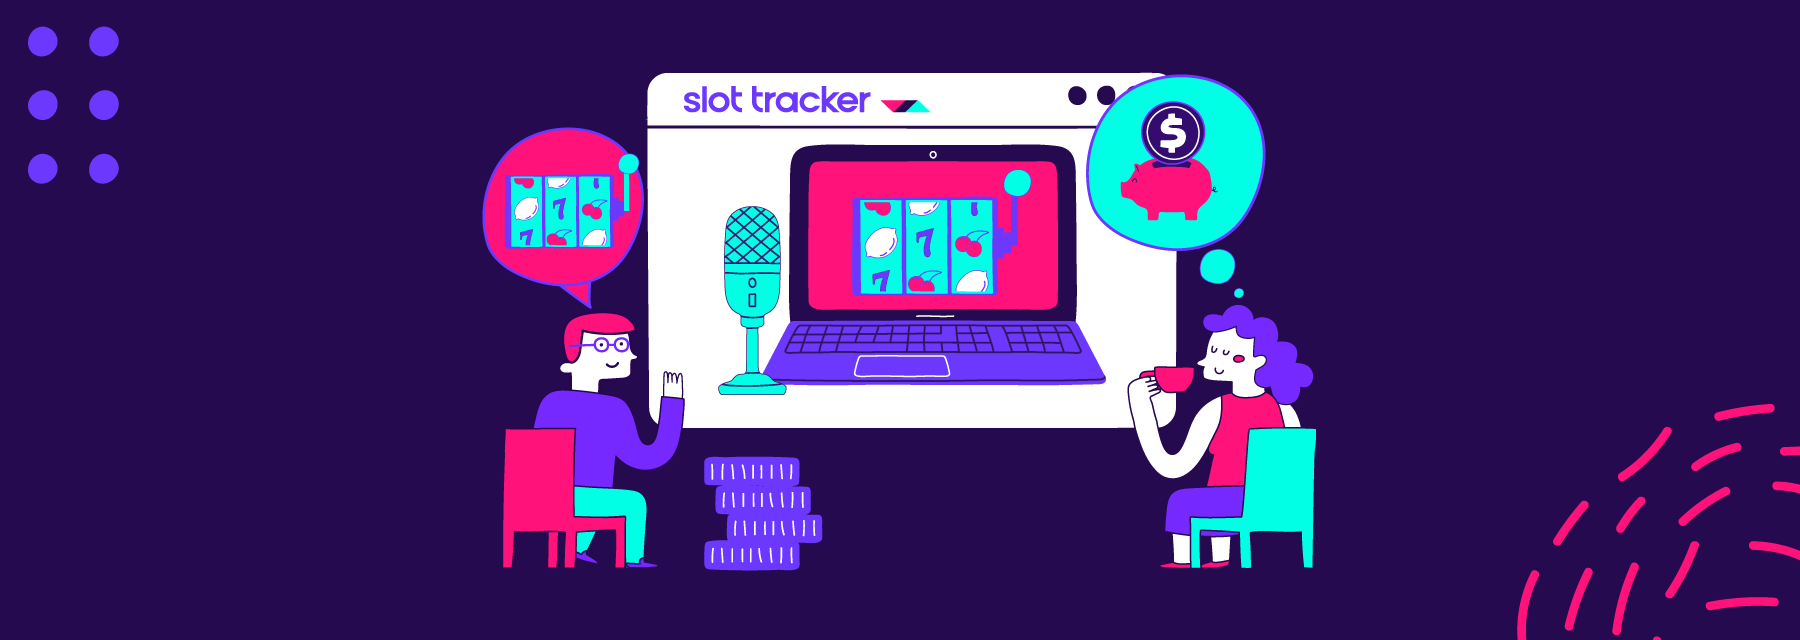 Slot Tracker Partners with The Slot Beasts for Riveting Live Streams and Prizes in the UAE